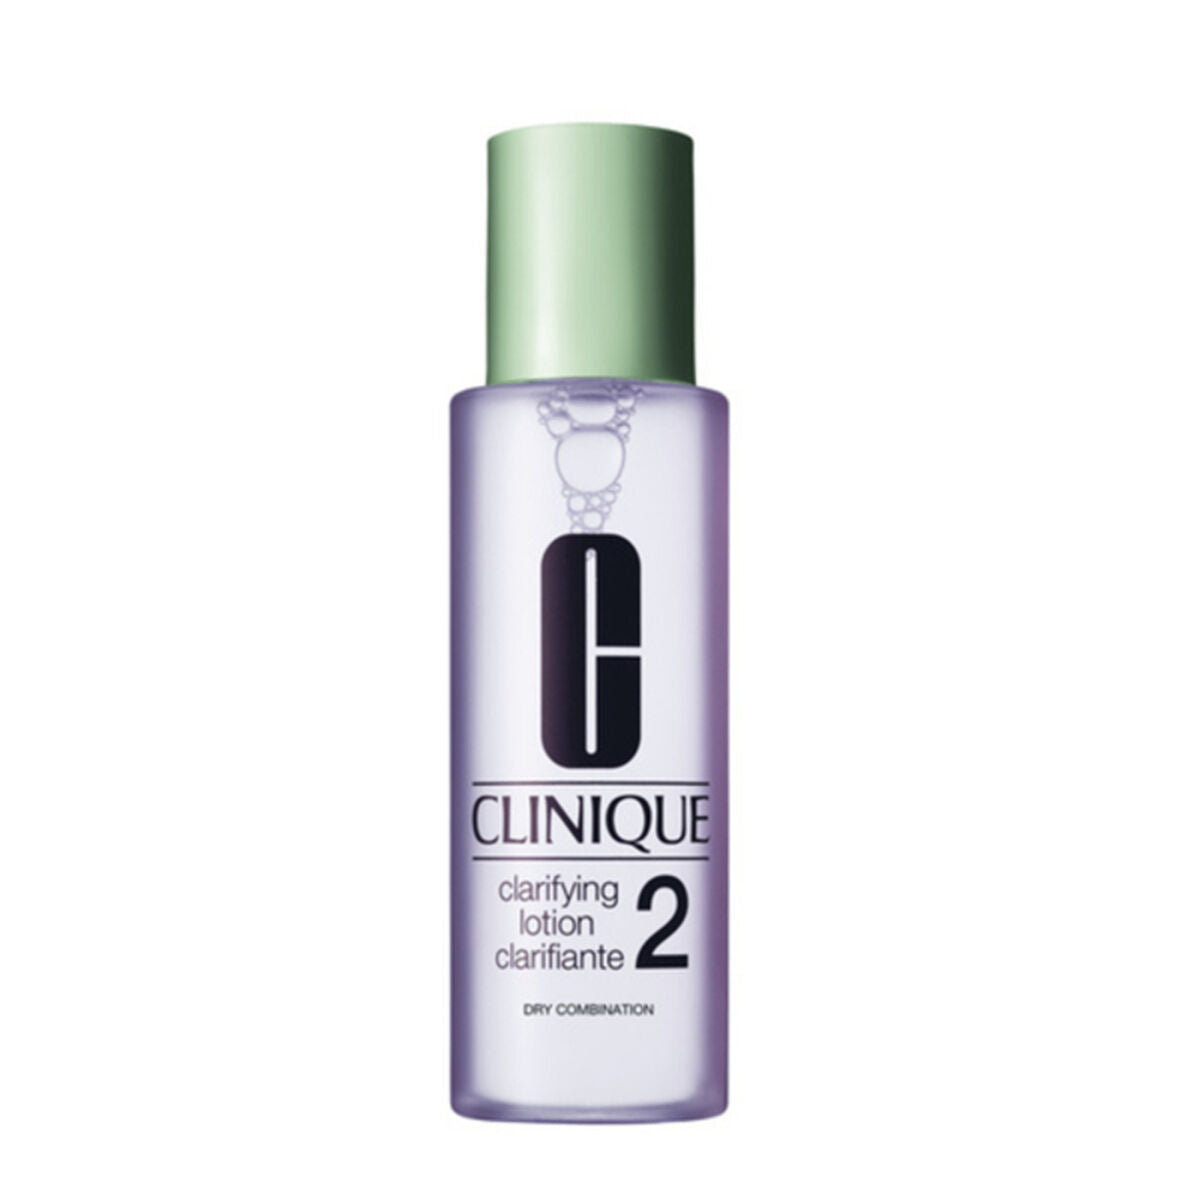 Toning Lotion Clarifying Clinique Combination skin-0